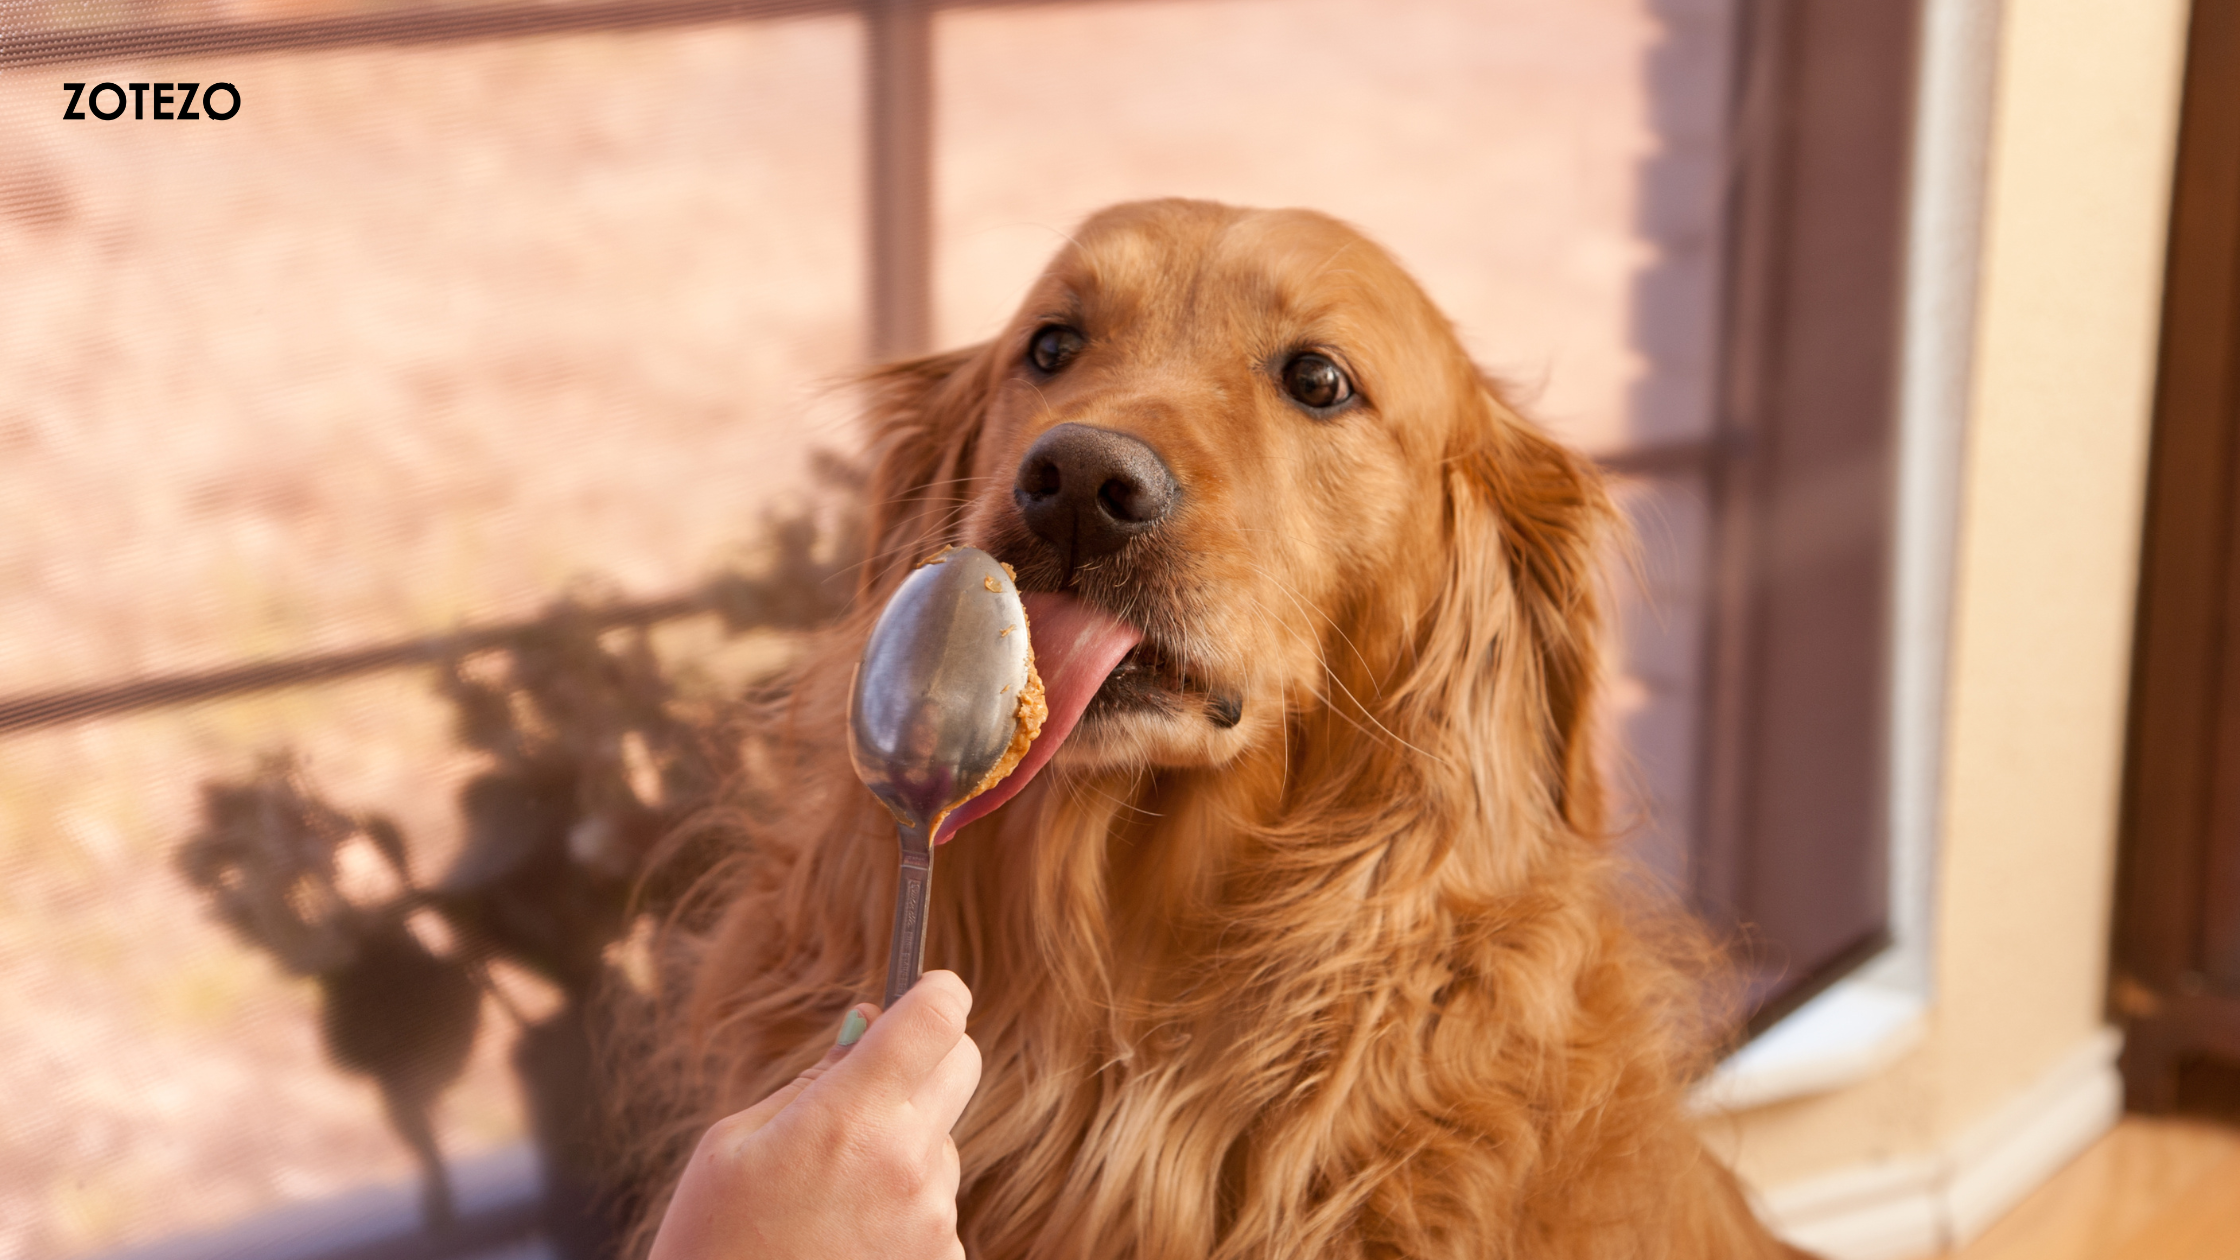 Peanut Butter For Dogs in Netherlands